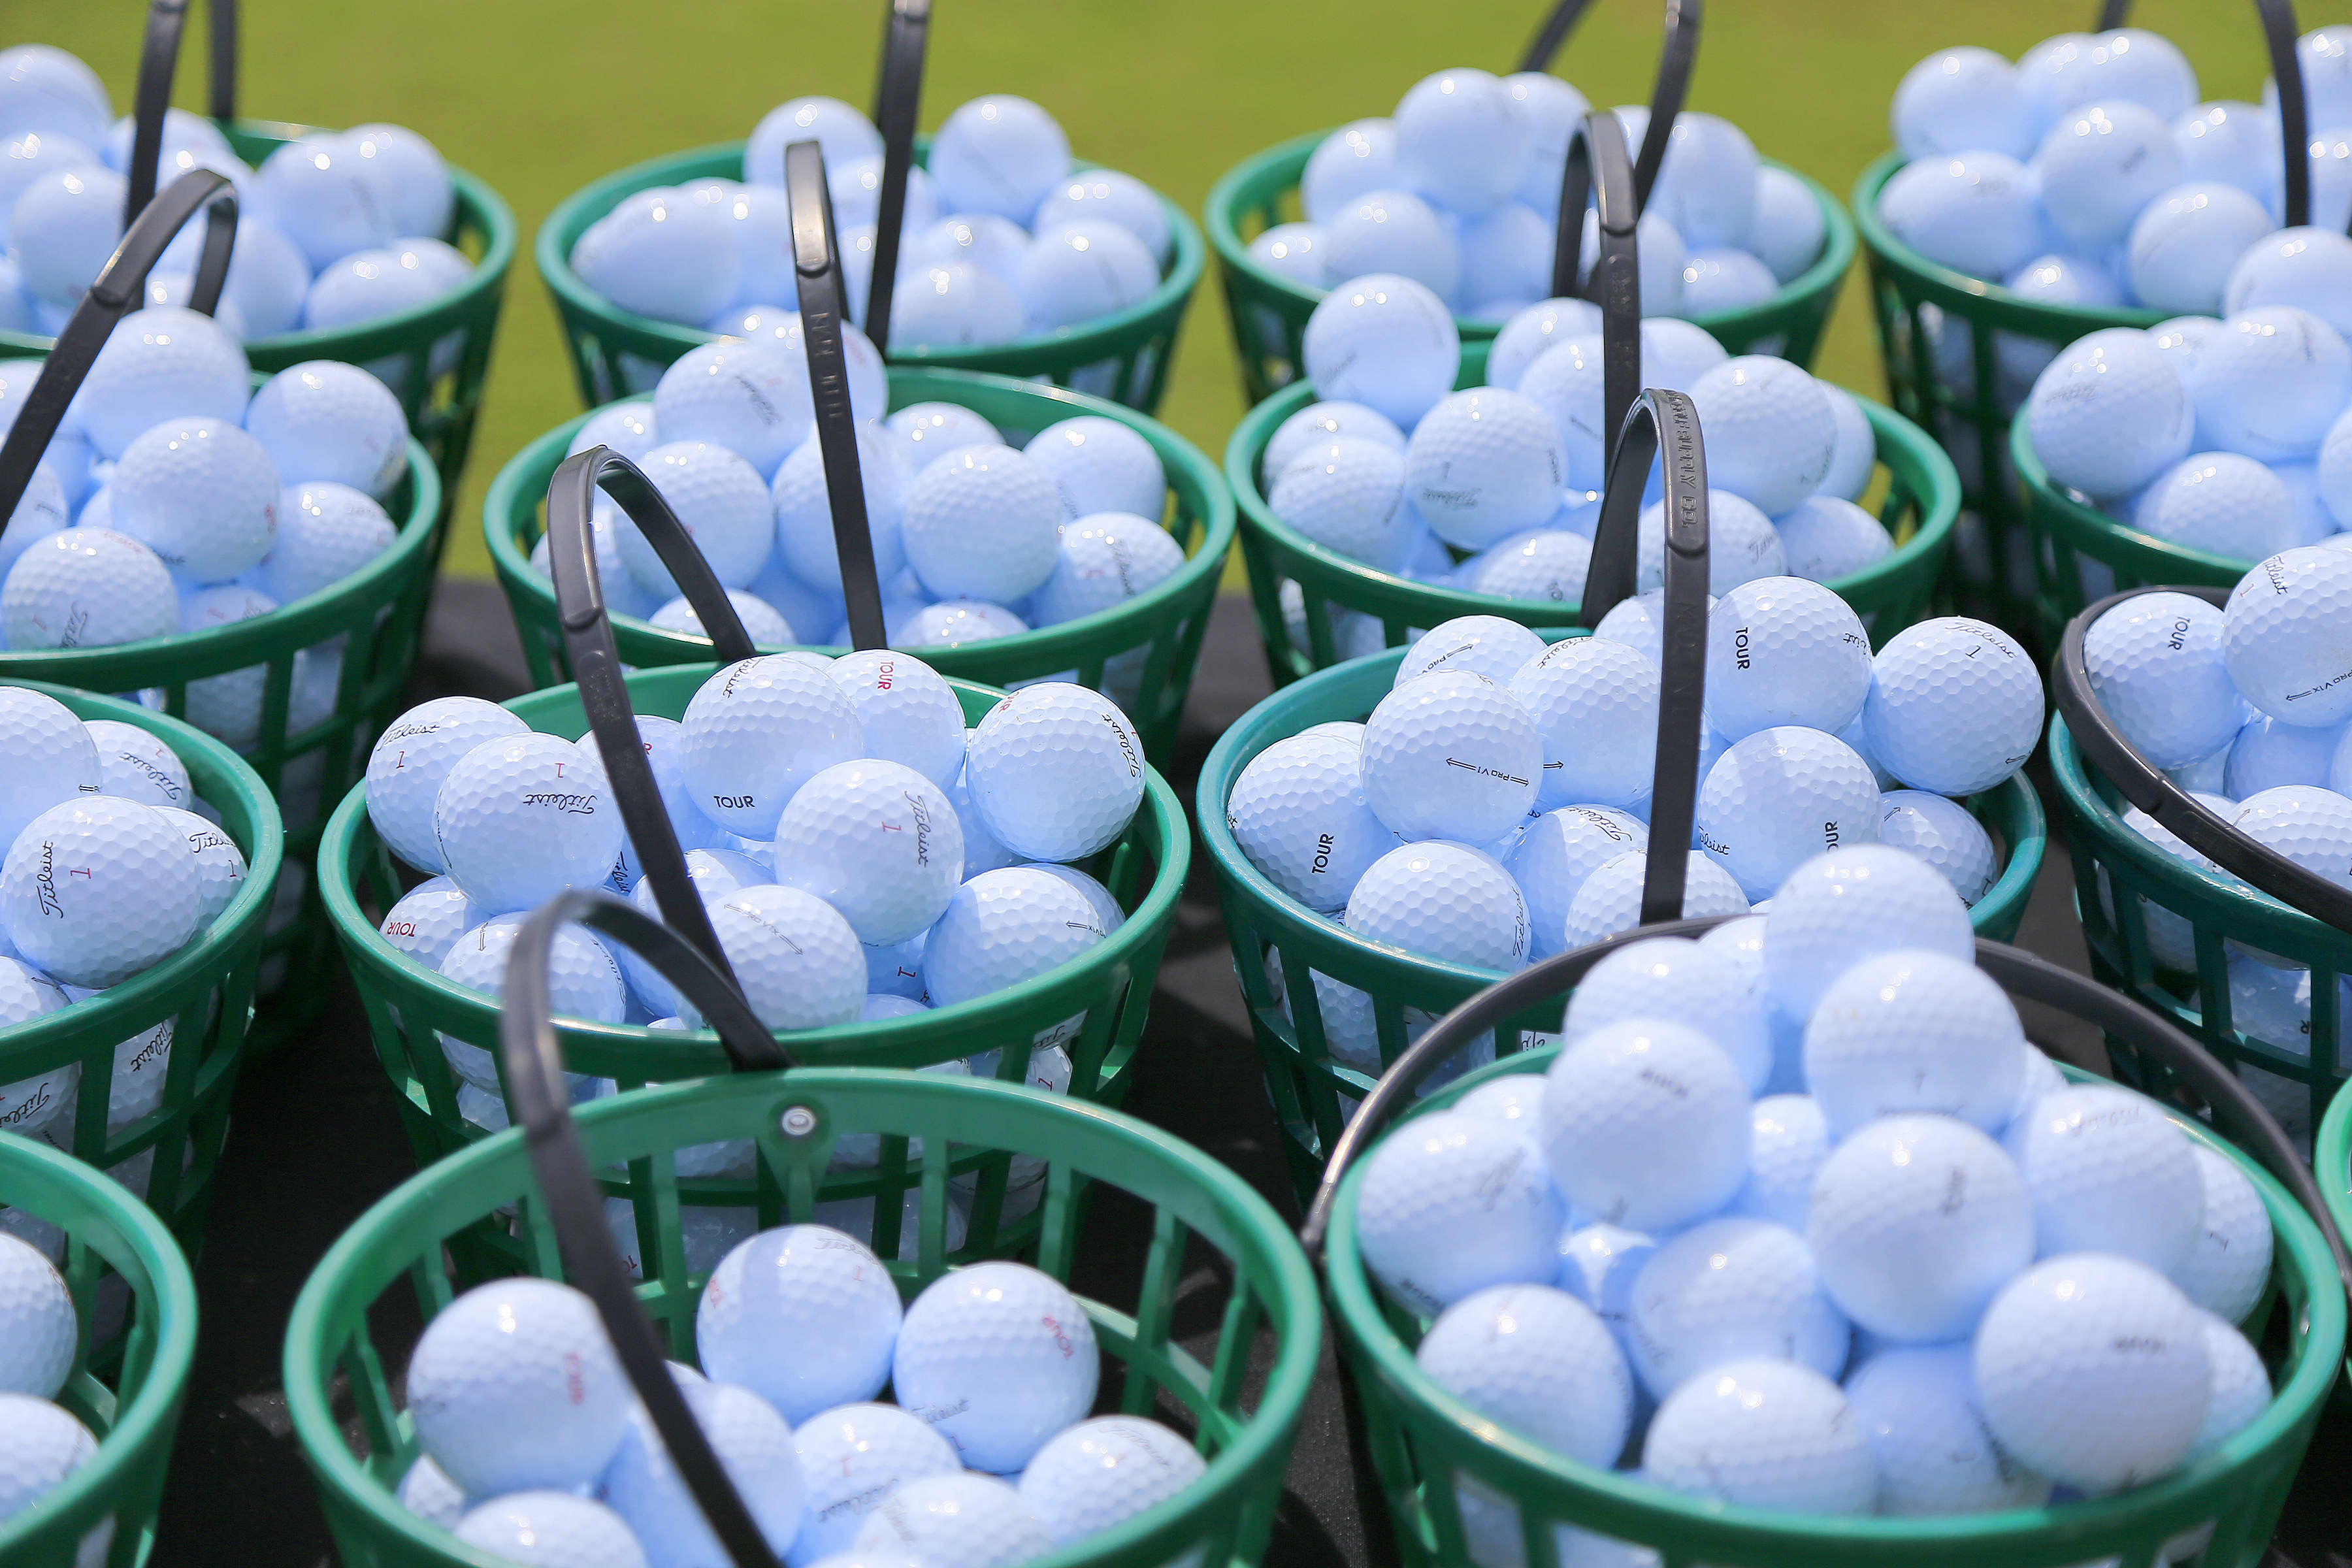 Golf's growth in popularity is much bigger than a pandemic story